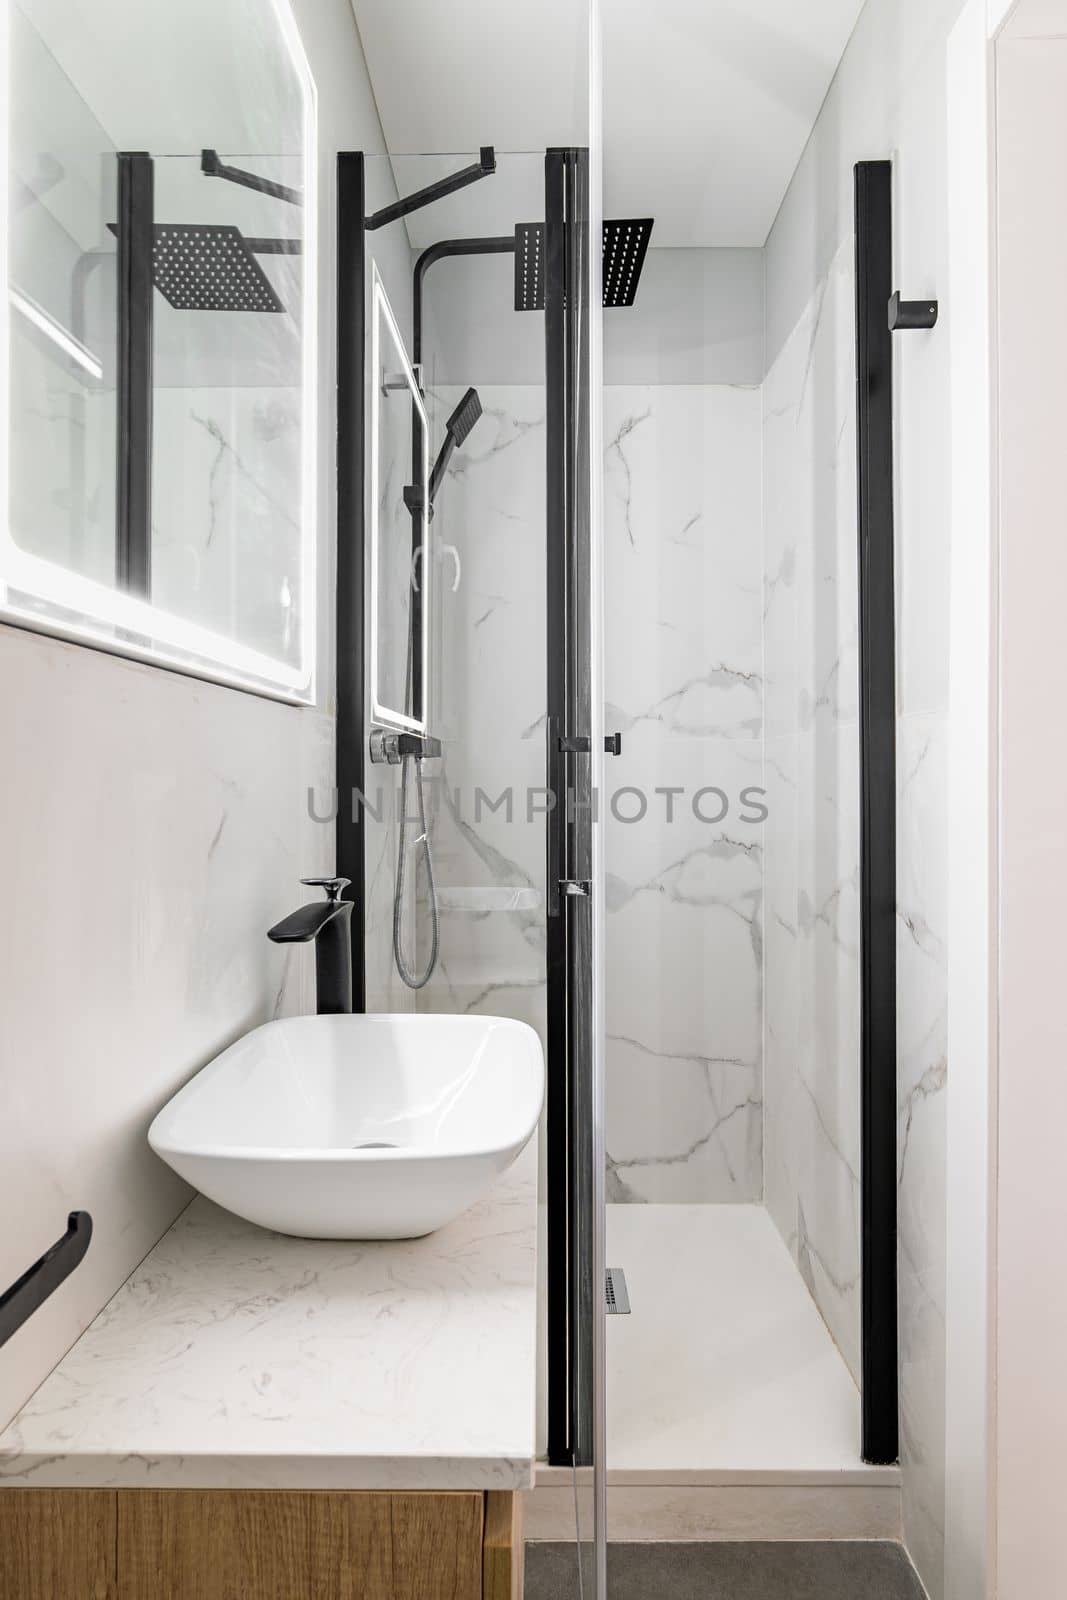 Bathroom with modern designer renovation and fittings. Vanity sink with black faucet. Walls of white granite tiles and square mirror with built-in light. by apavlin